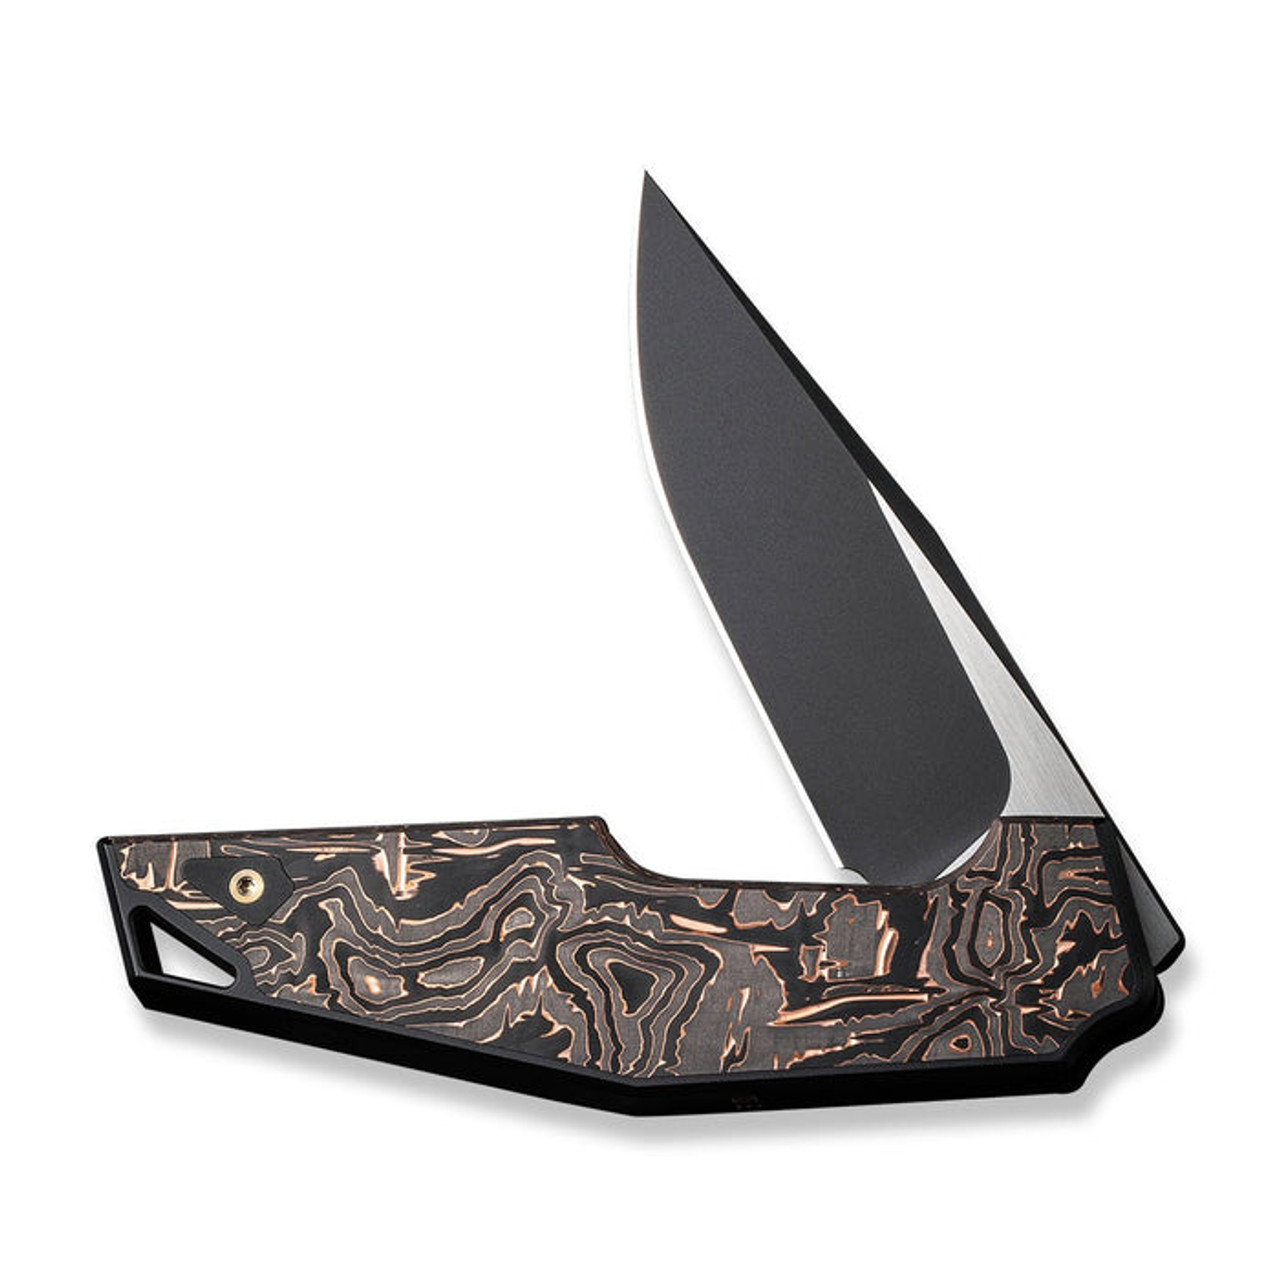 We Knife OAO (WE230012) 3.4" CPM-20CV Hand Blackwashed and Satin Clip Point Plain Blade, Black and Copper Titanium Handle with Copper Foil Carbon Fiber Inlay